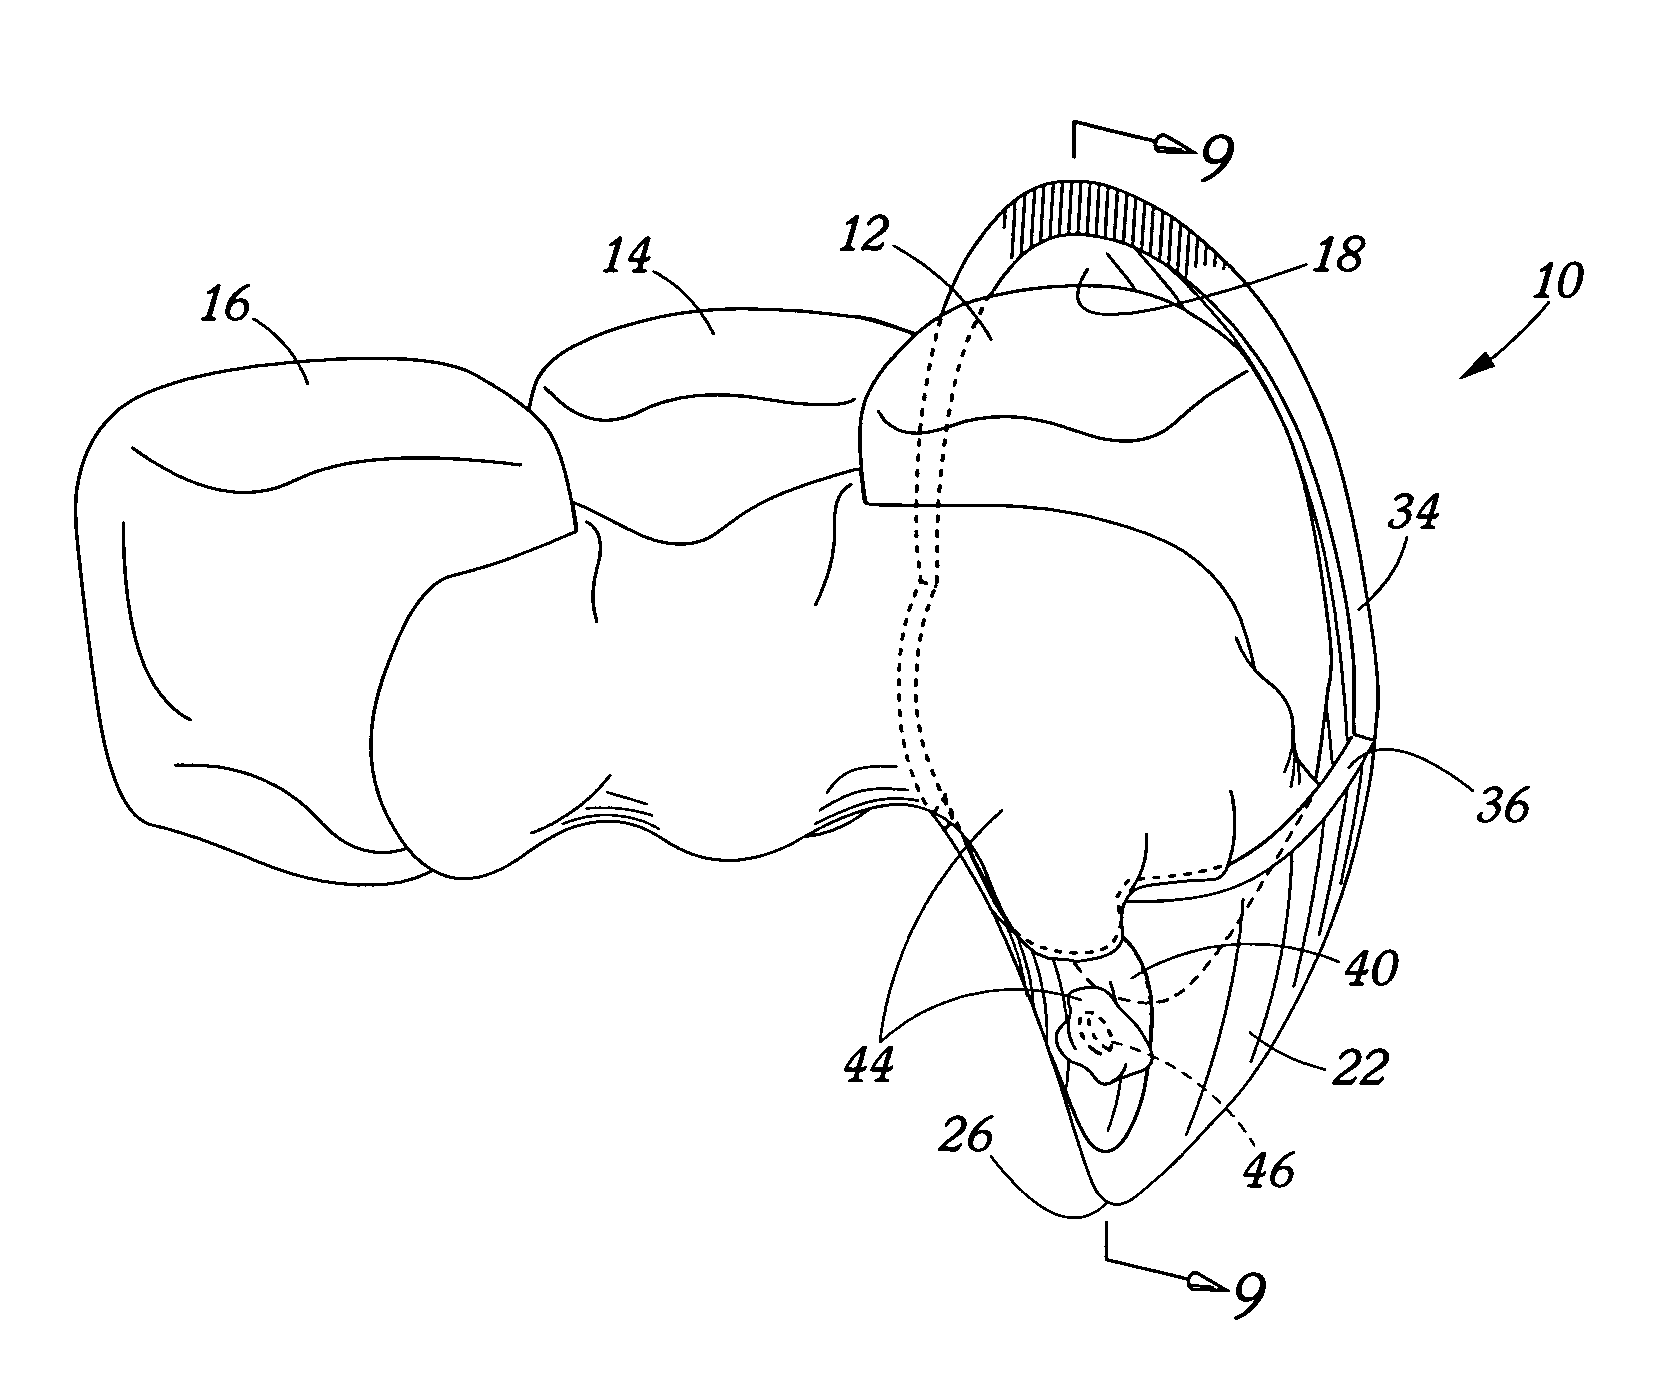 Removable tooth cap and method of attachment therefor